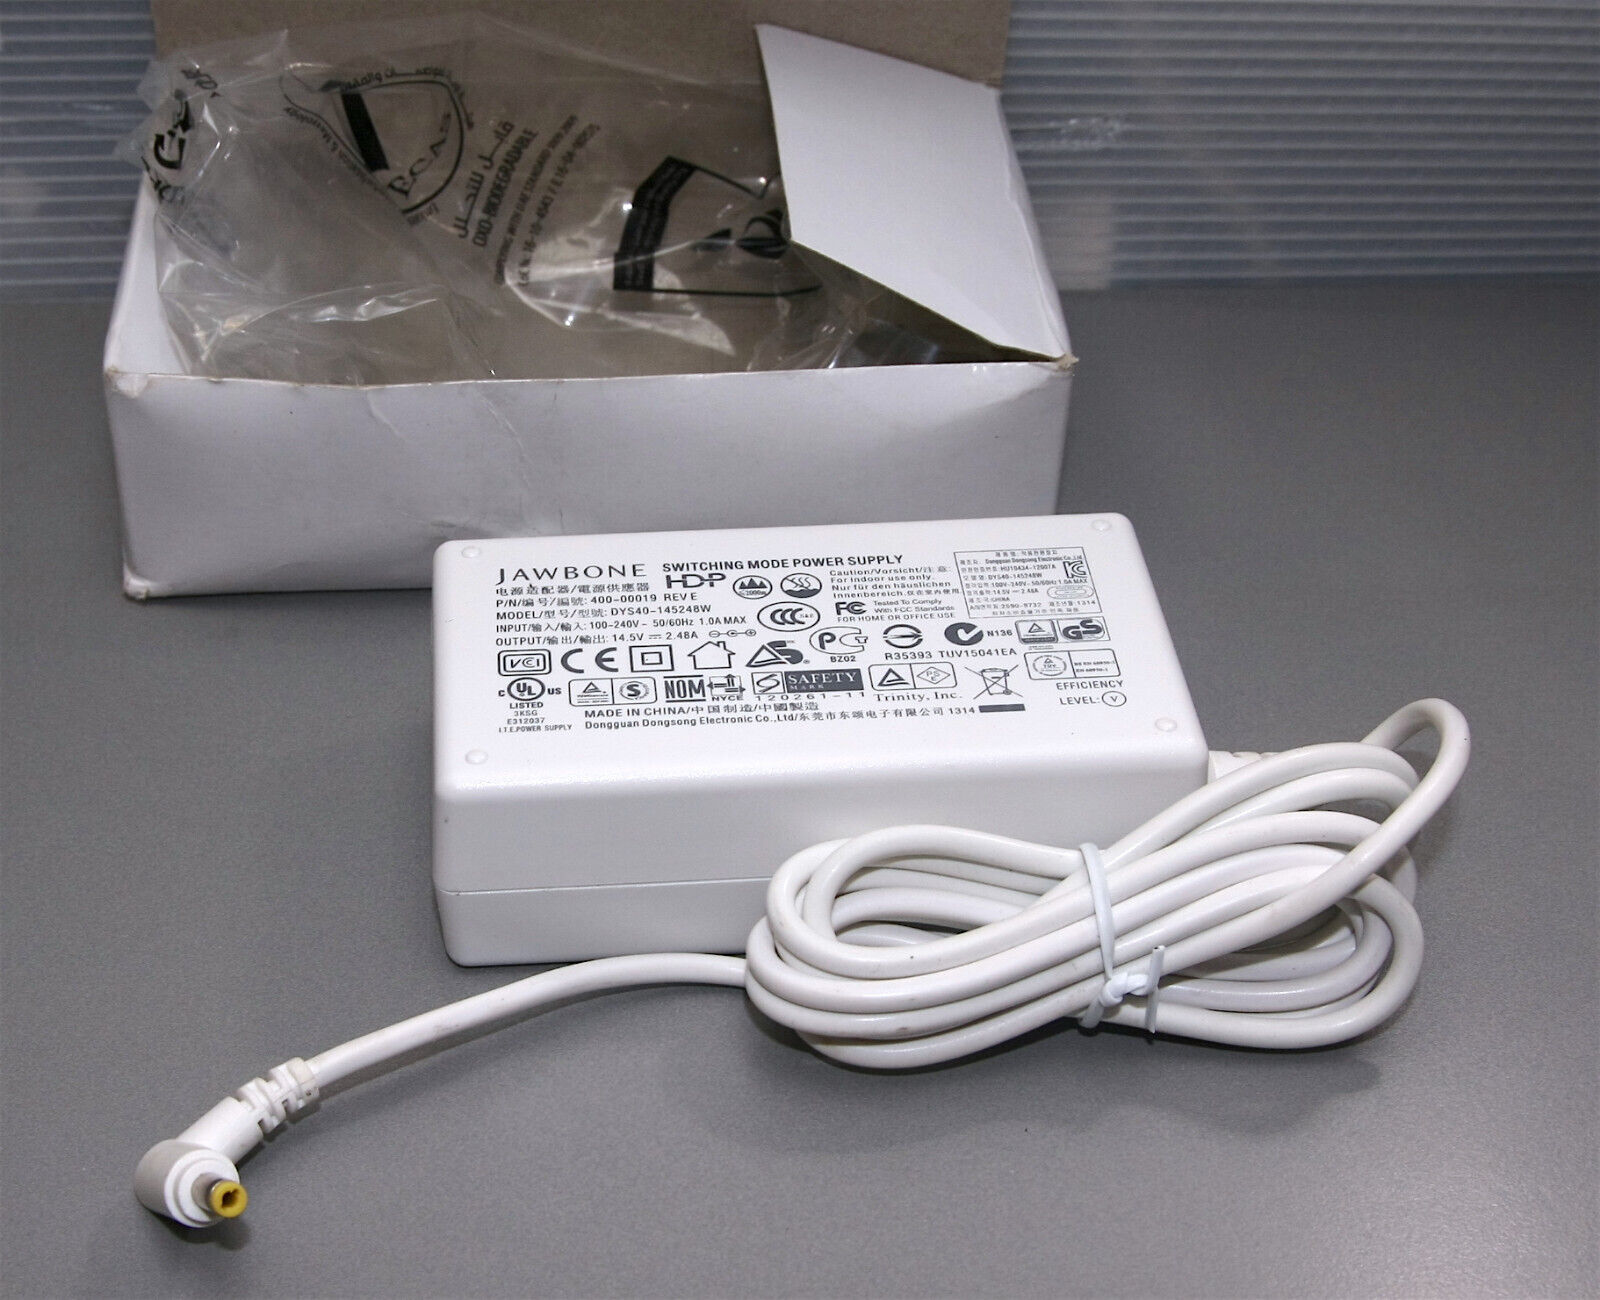 Original NEW NOS Jawbone Power Supply Charger AC Adapter for Big Jambox BT Brand: Jawbone Type: A